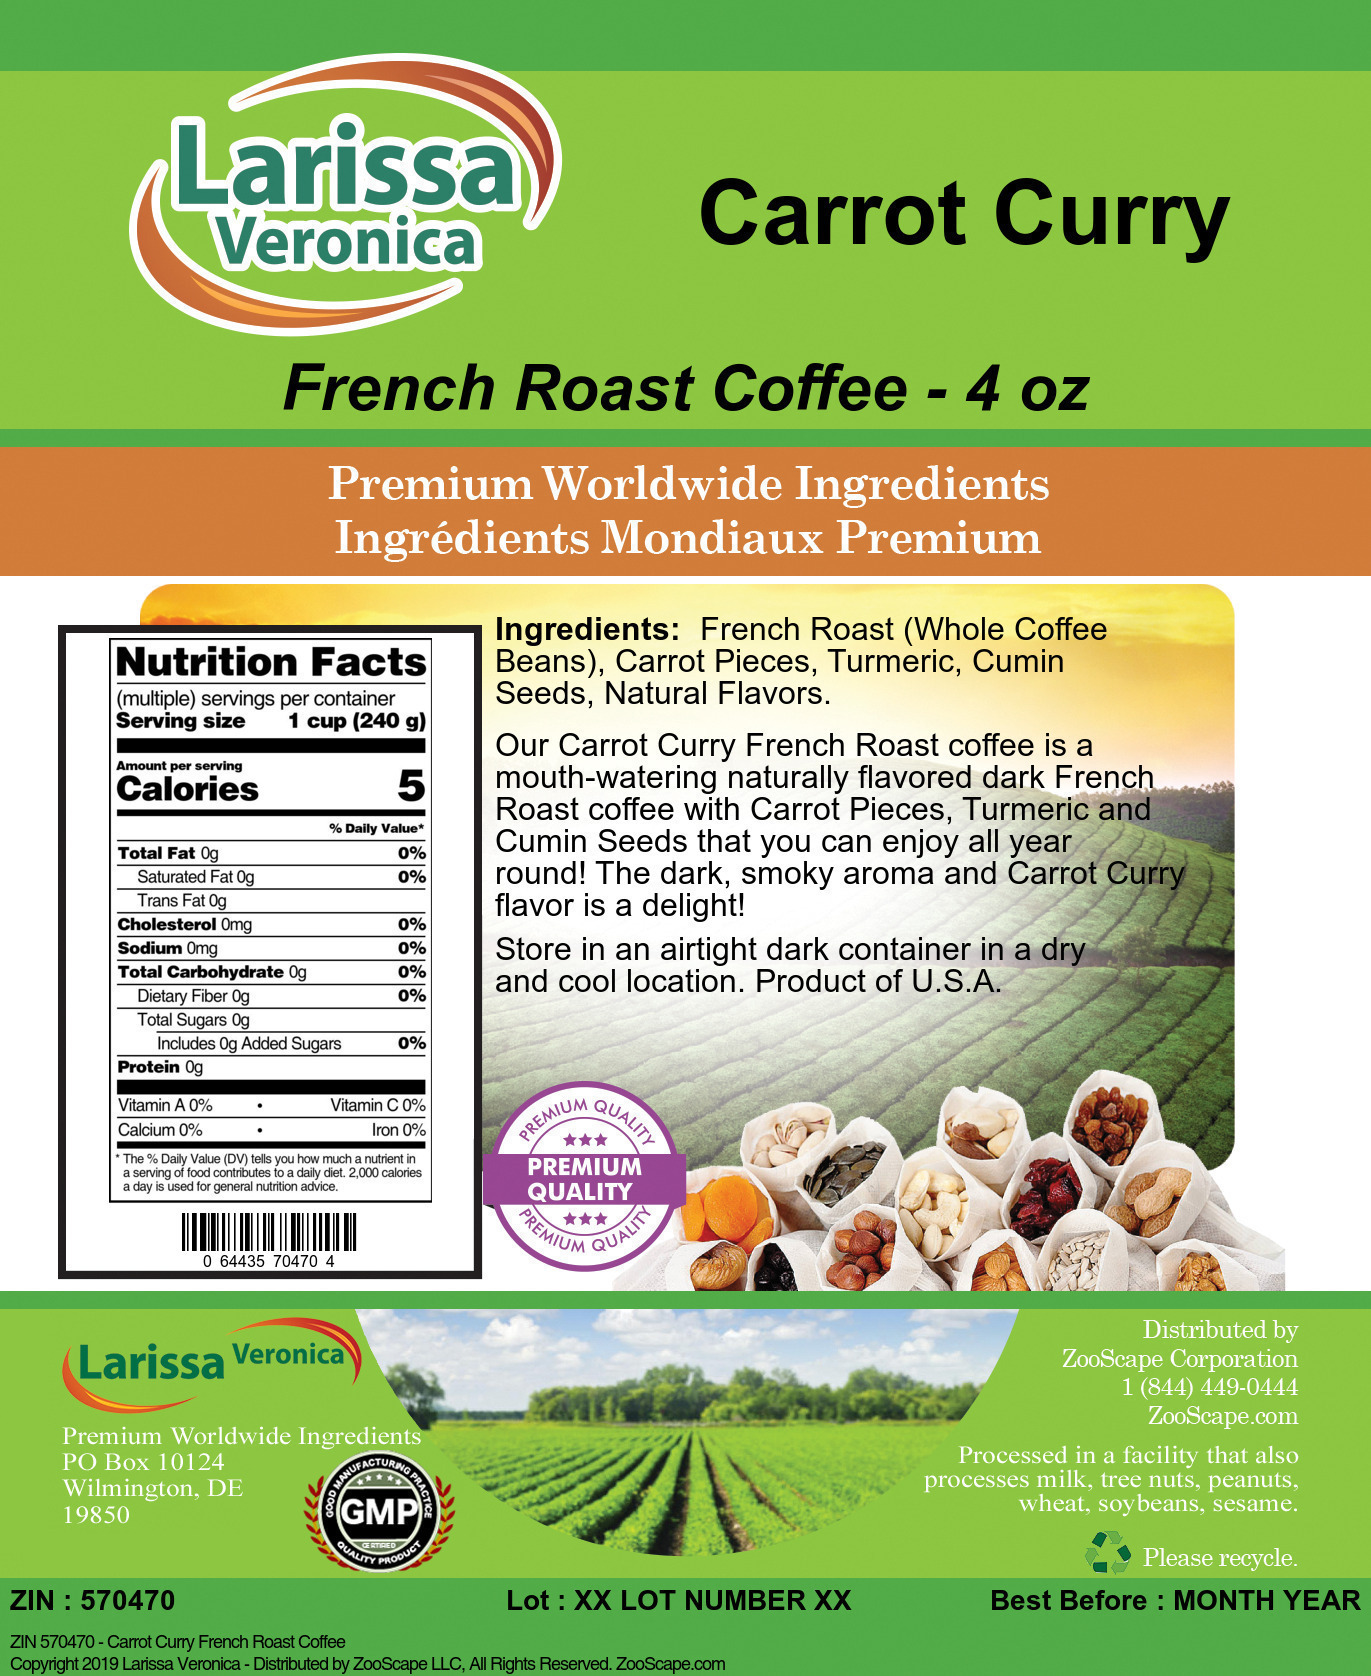 Carrot Curry French Roast Coffee - Label